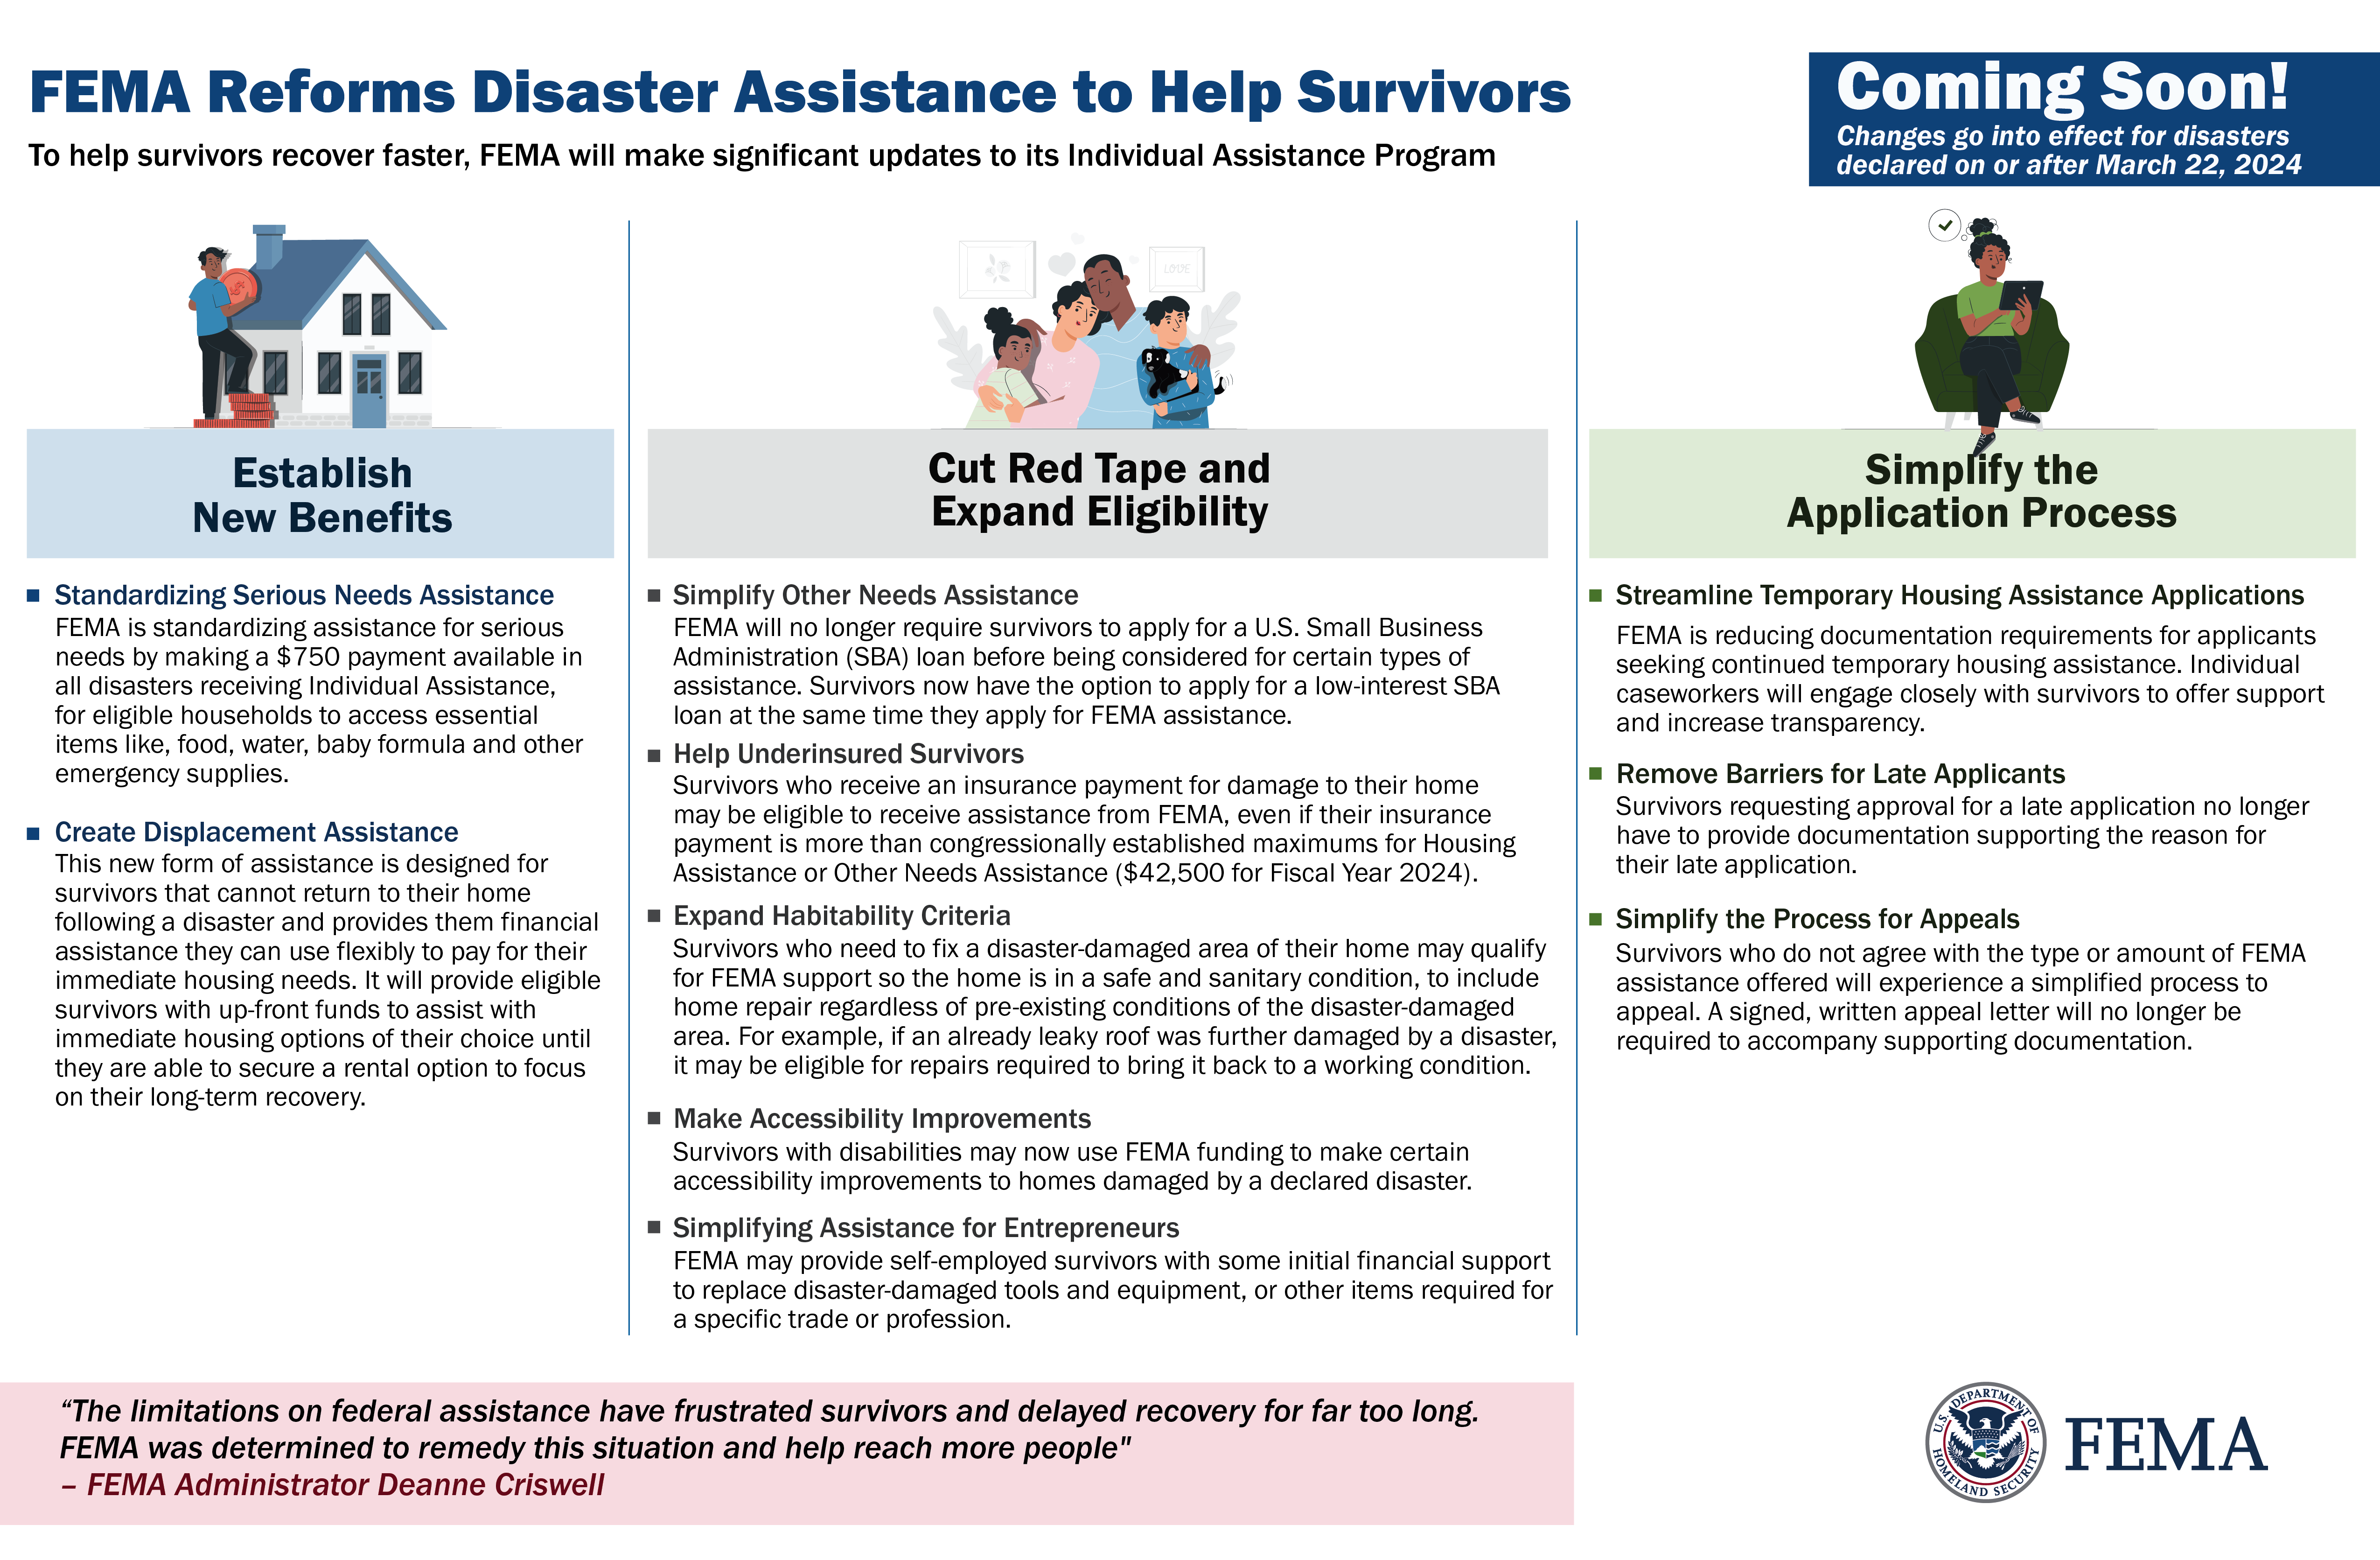 A flyer detailing upcoming reforms to FEMA's Disaster Assistance Program to help survivors recover more equitably. Changes go into effect for disasters declared on or after March 22, 2024. The flyer has three sections. The left section, titled Establish New Benefits, outlines: Standardizing Serious Needs Assistance and Create Displacement Assistance. The middle section, Cut Red Tape and Expand Eligibility, discusses: Simplifying Other Needs Assistance, Helping Underinsured Survivors, Expanding Habitability Criteria, Making Accessibility Improvements, Simplifying Assistance for Entrepreneurs. The right section, Simplify the Application Process, Removing Barriers for Late Applicants, Simplifying the Process for Appeals. At the bottom, a quote from FEMA Administrator Criswell states, "The limitations on federal assistance have frustrated survivors and delayed recovery for far too long. FEMA was determined to remedy this situation and help reach more people." FEMA logo at bottom.